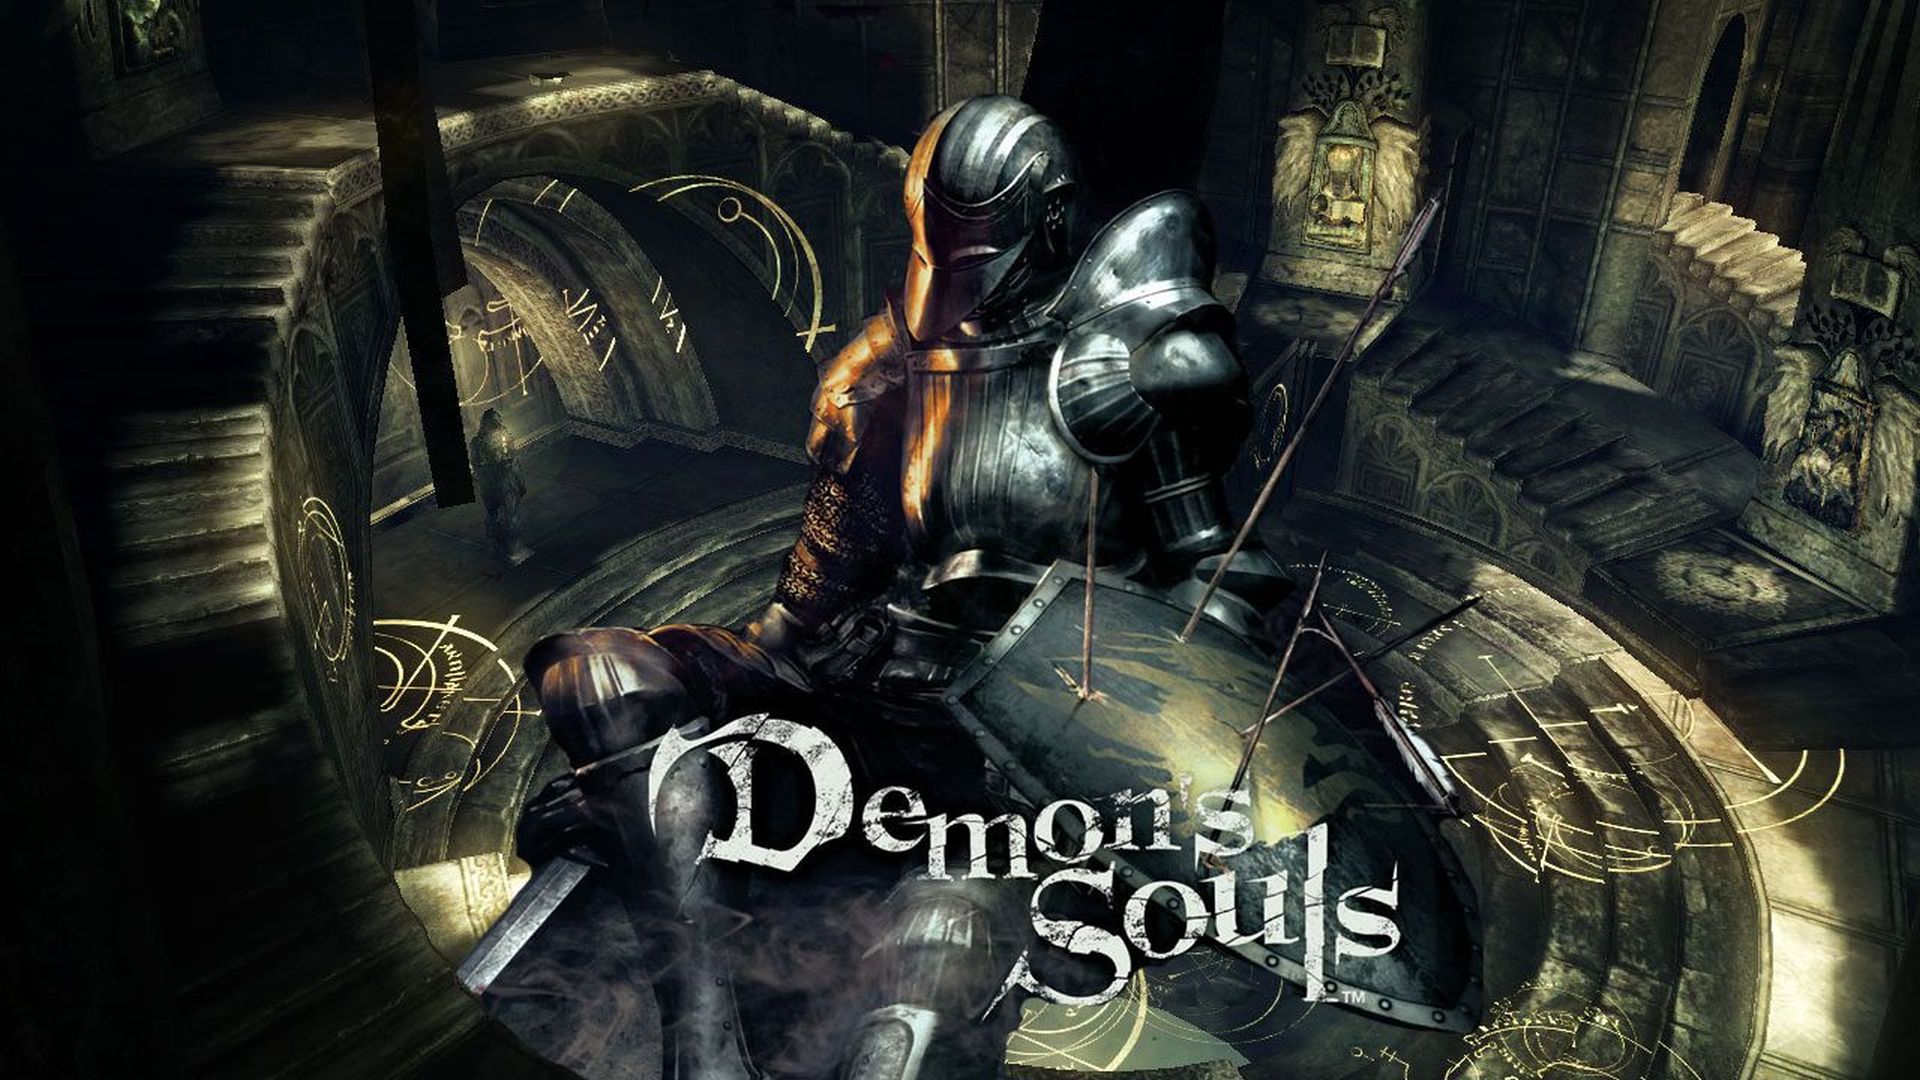 The Best Weapons In Demon Souls Based On Primary Stat Scaling